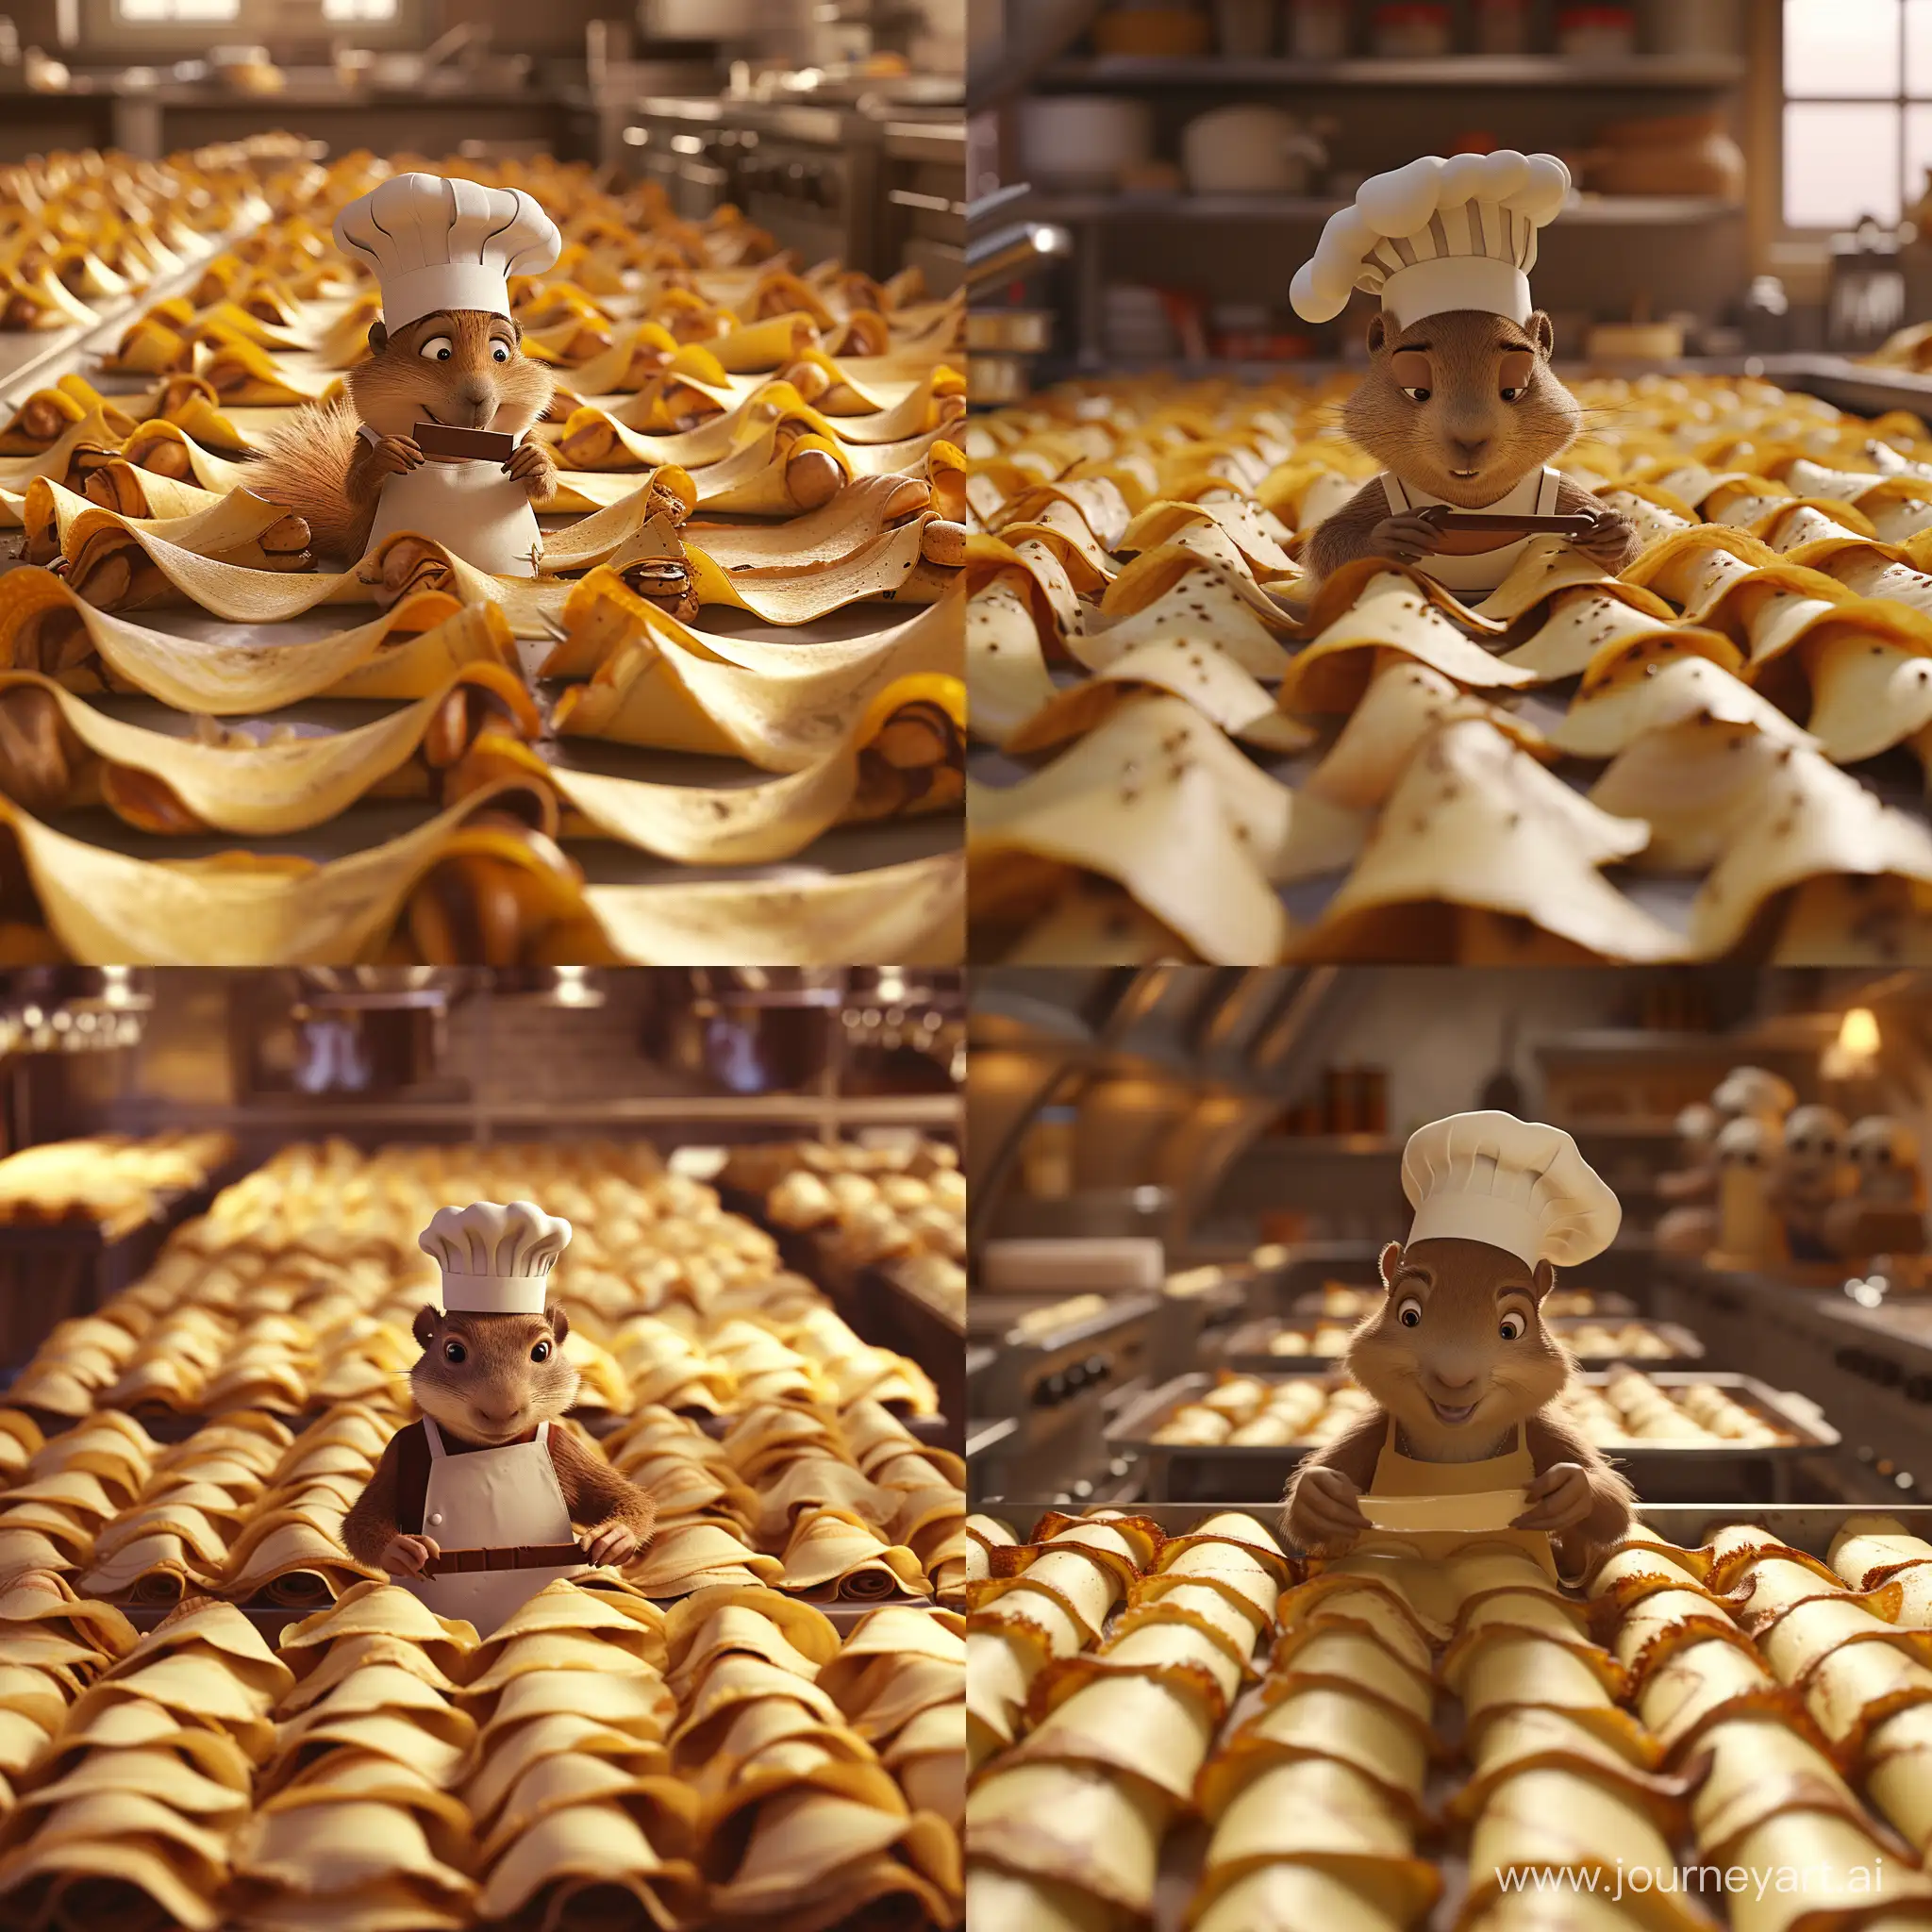 create an image of a humorous scene in a kitchen where hundreds of pancakes are being prepared. The pancakes are each wrapped around a thin slab of chocolate. In the middle, facing the camera, a very detailed marmot with a chef's hat and a kitchen apron and with beautiful, well-detailed fur. she is wrapping a thin slab of chocolate in a crepe. the groundhog looks concentrated while doing this painstaking work. Pixar animated style.